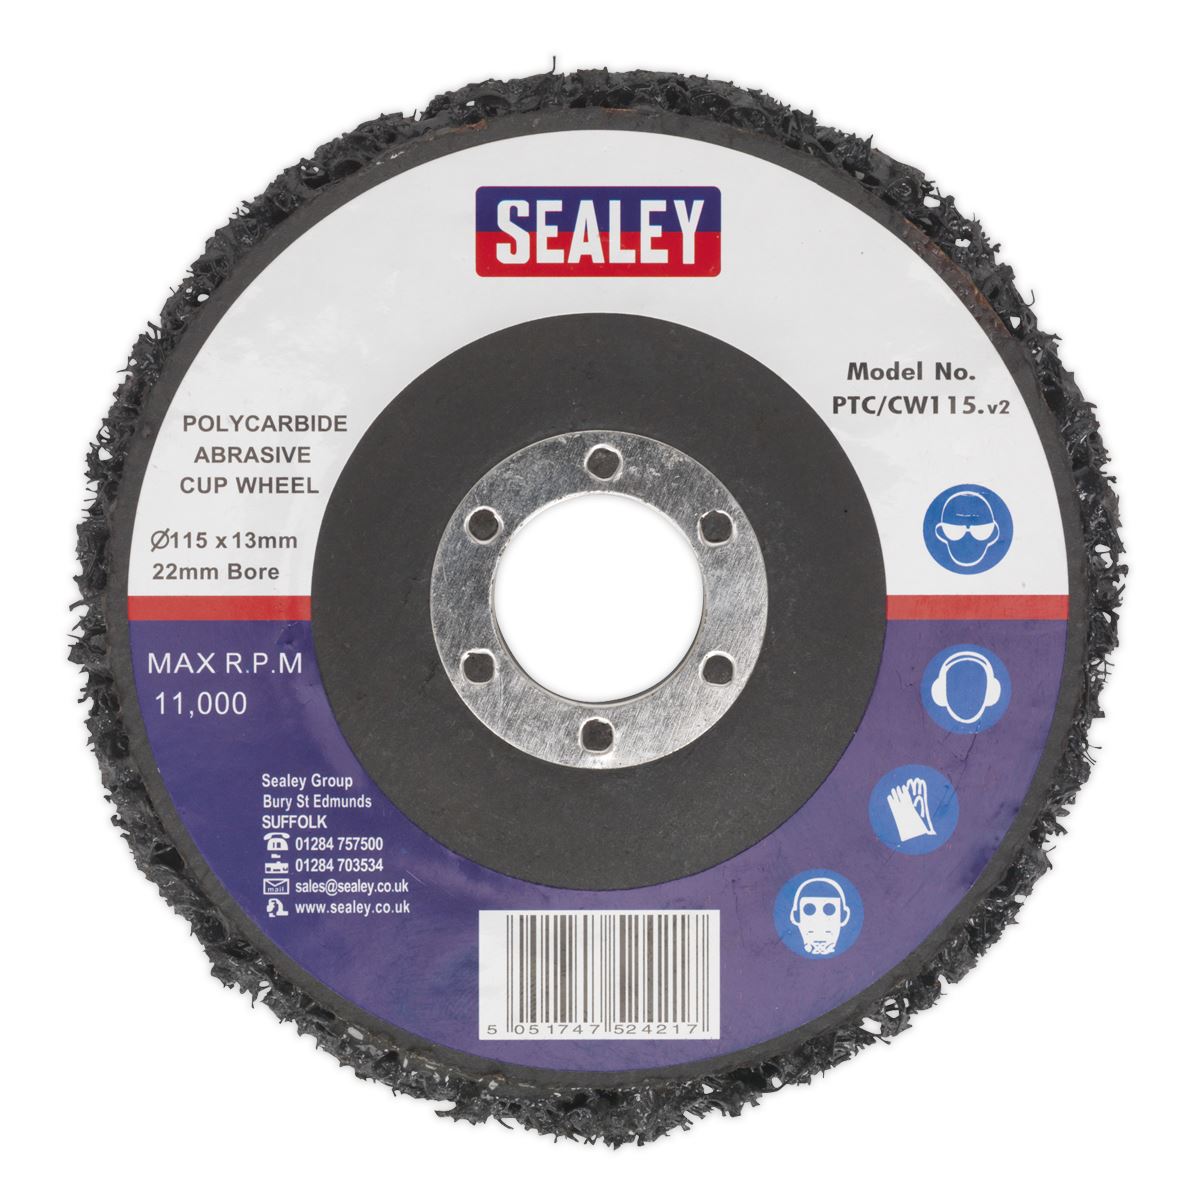 Sealey 115mm Polycarbide Abrasive Cup Wheel Paint Rust Removal Angle Grinder